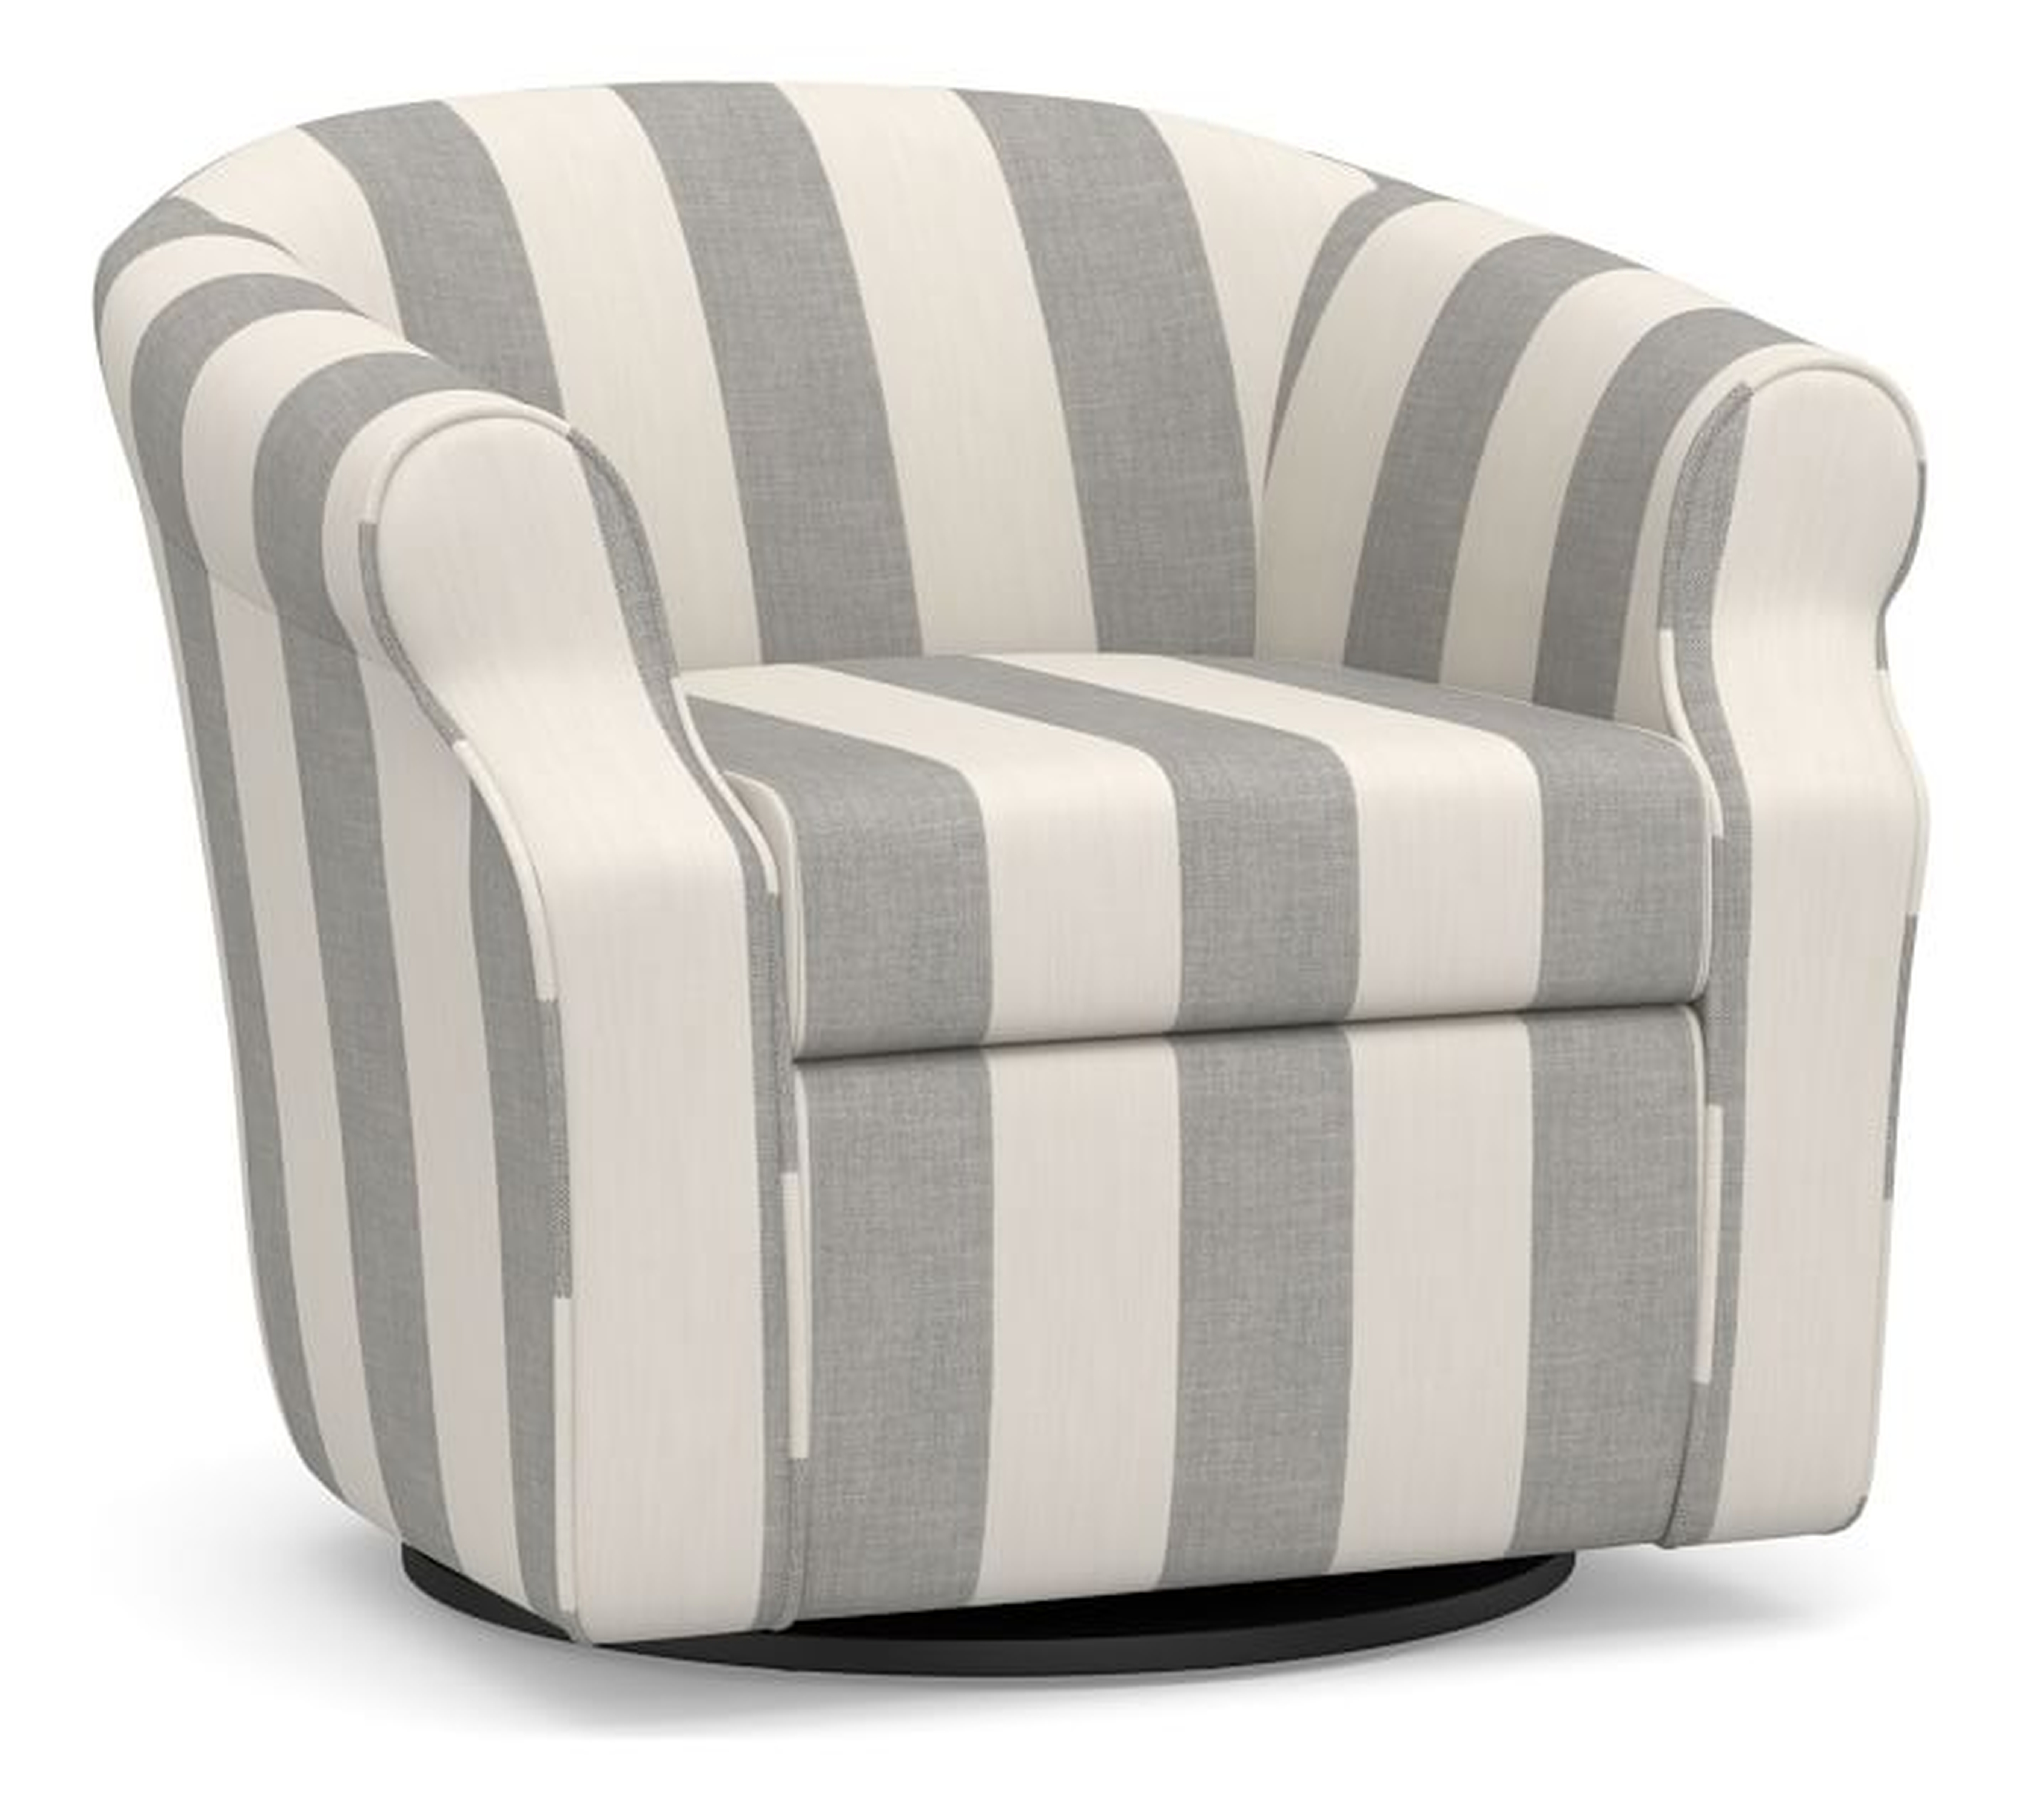 SoMa Lyndon Upholstered Swivel Armchair, Polyester Wrapped Cushions, Premium Performance Awning Stripe Light Gray/Ivory - Pottery Barn